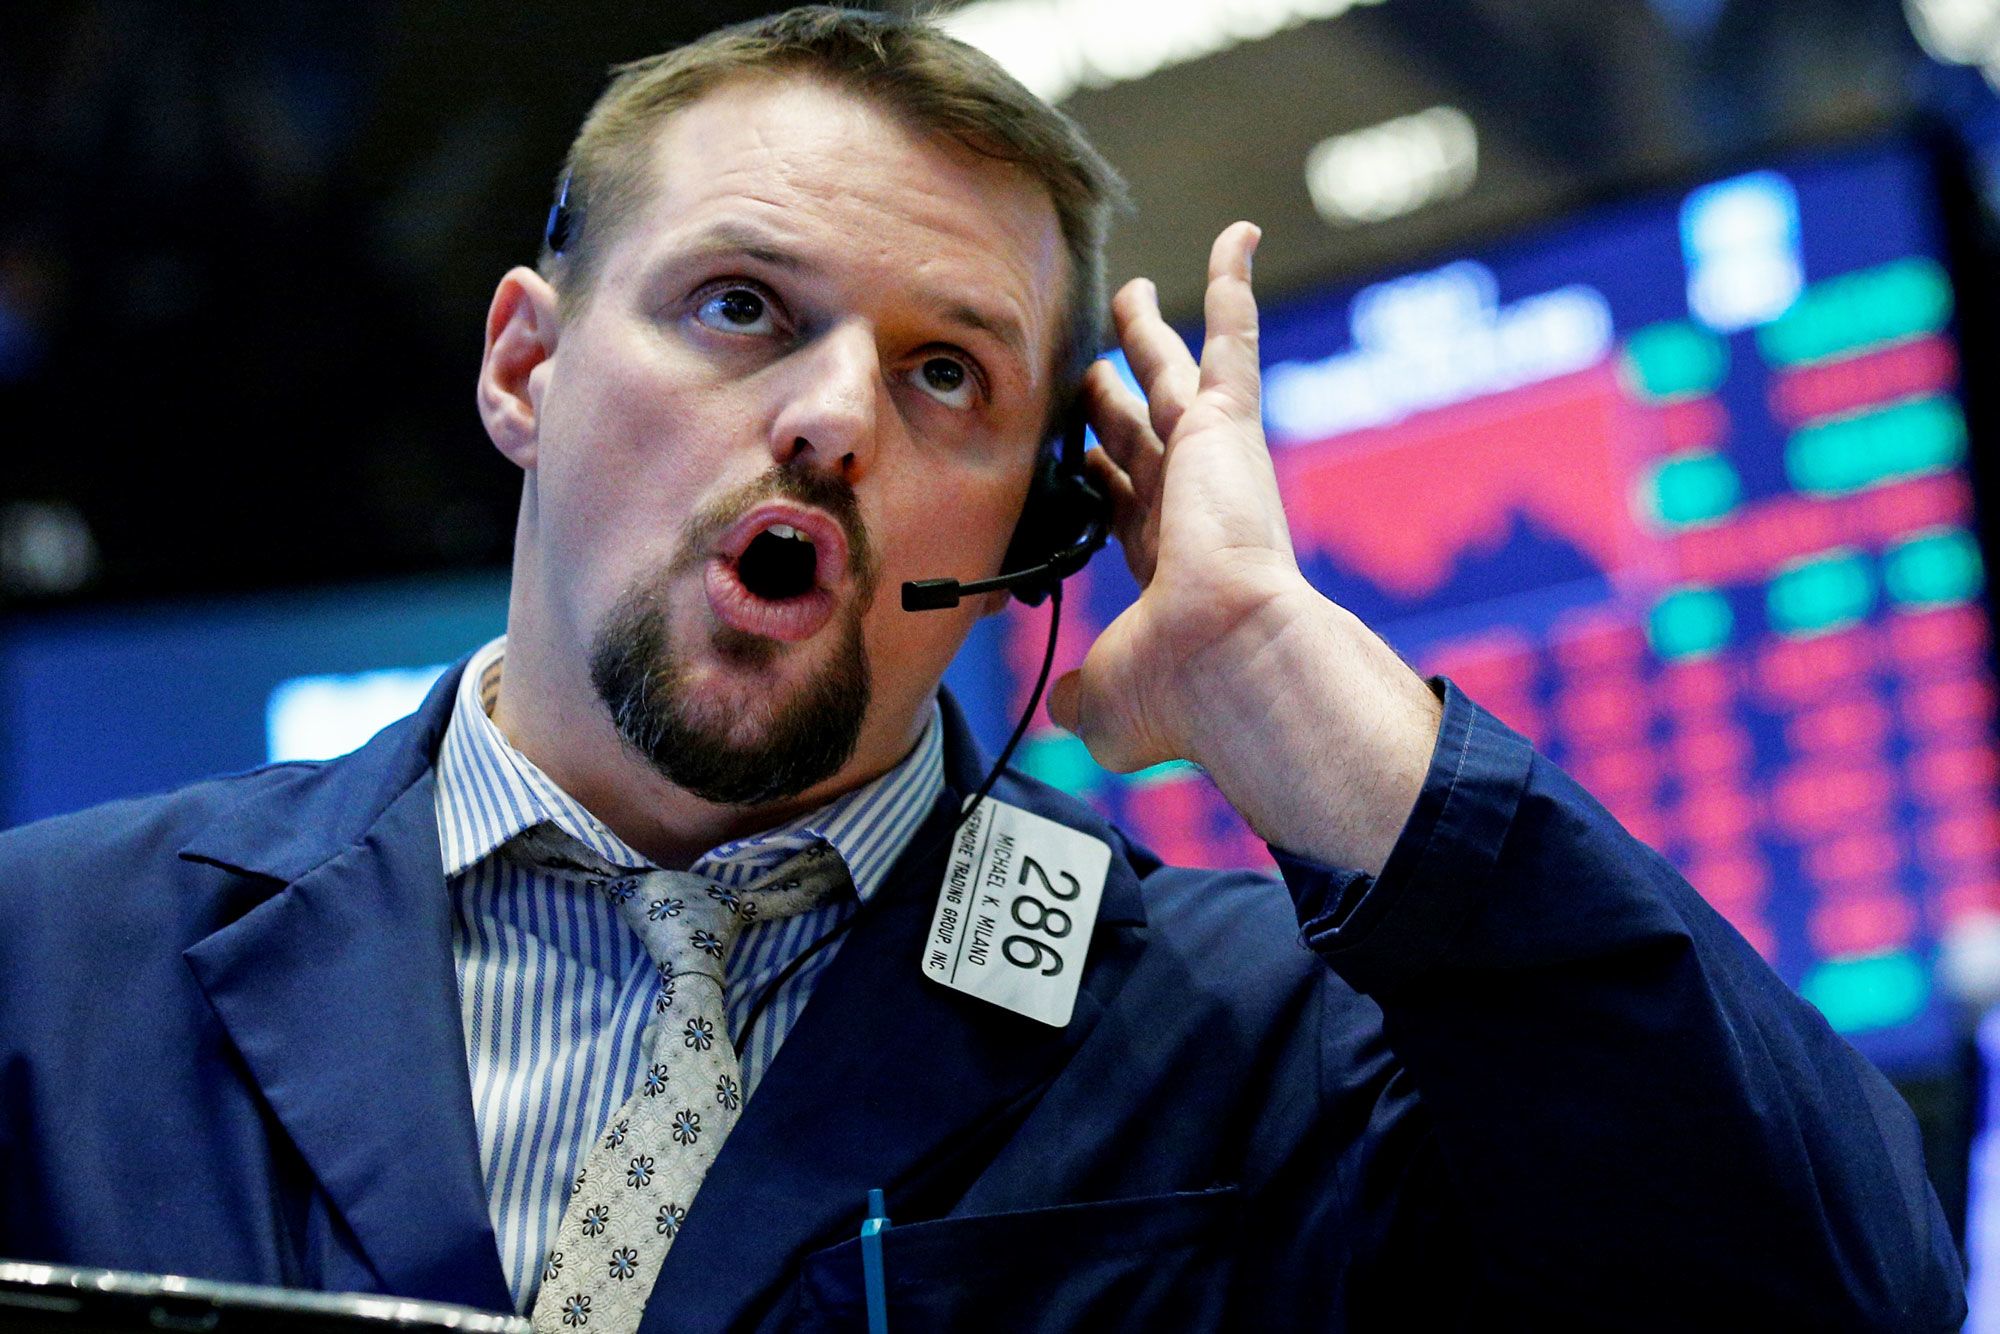 Investors are betting a recession is coming, Jim Cramer says